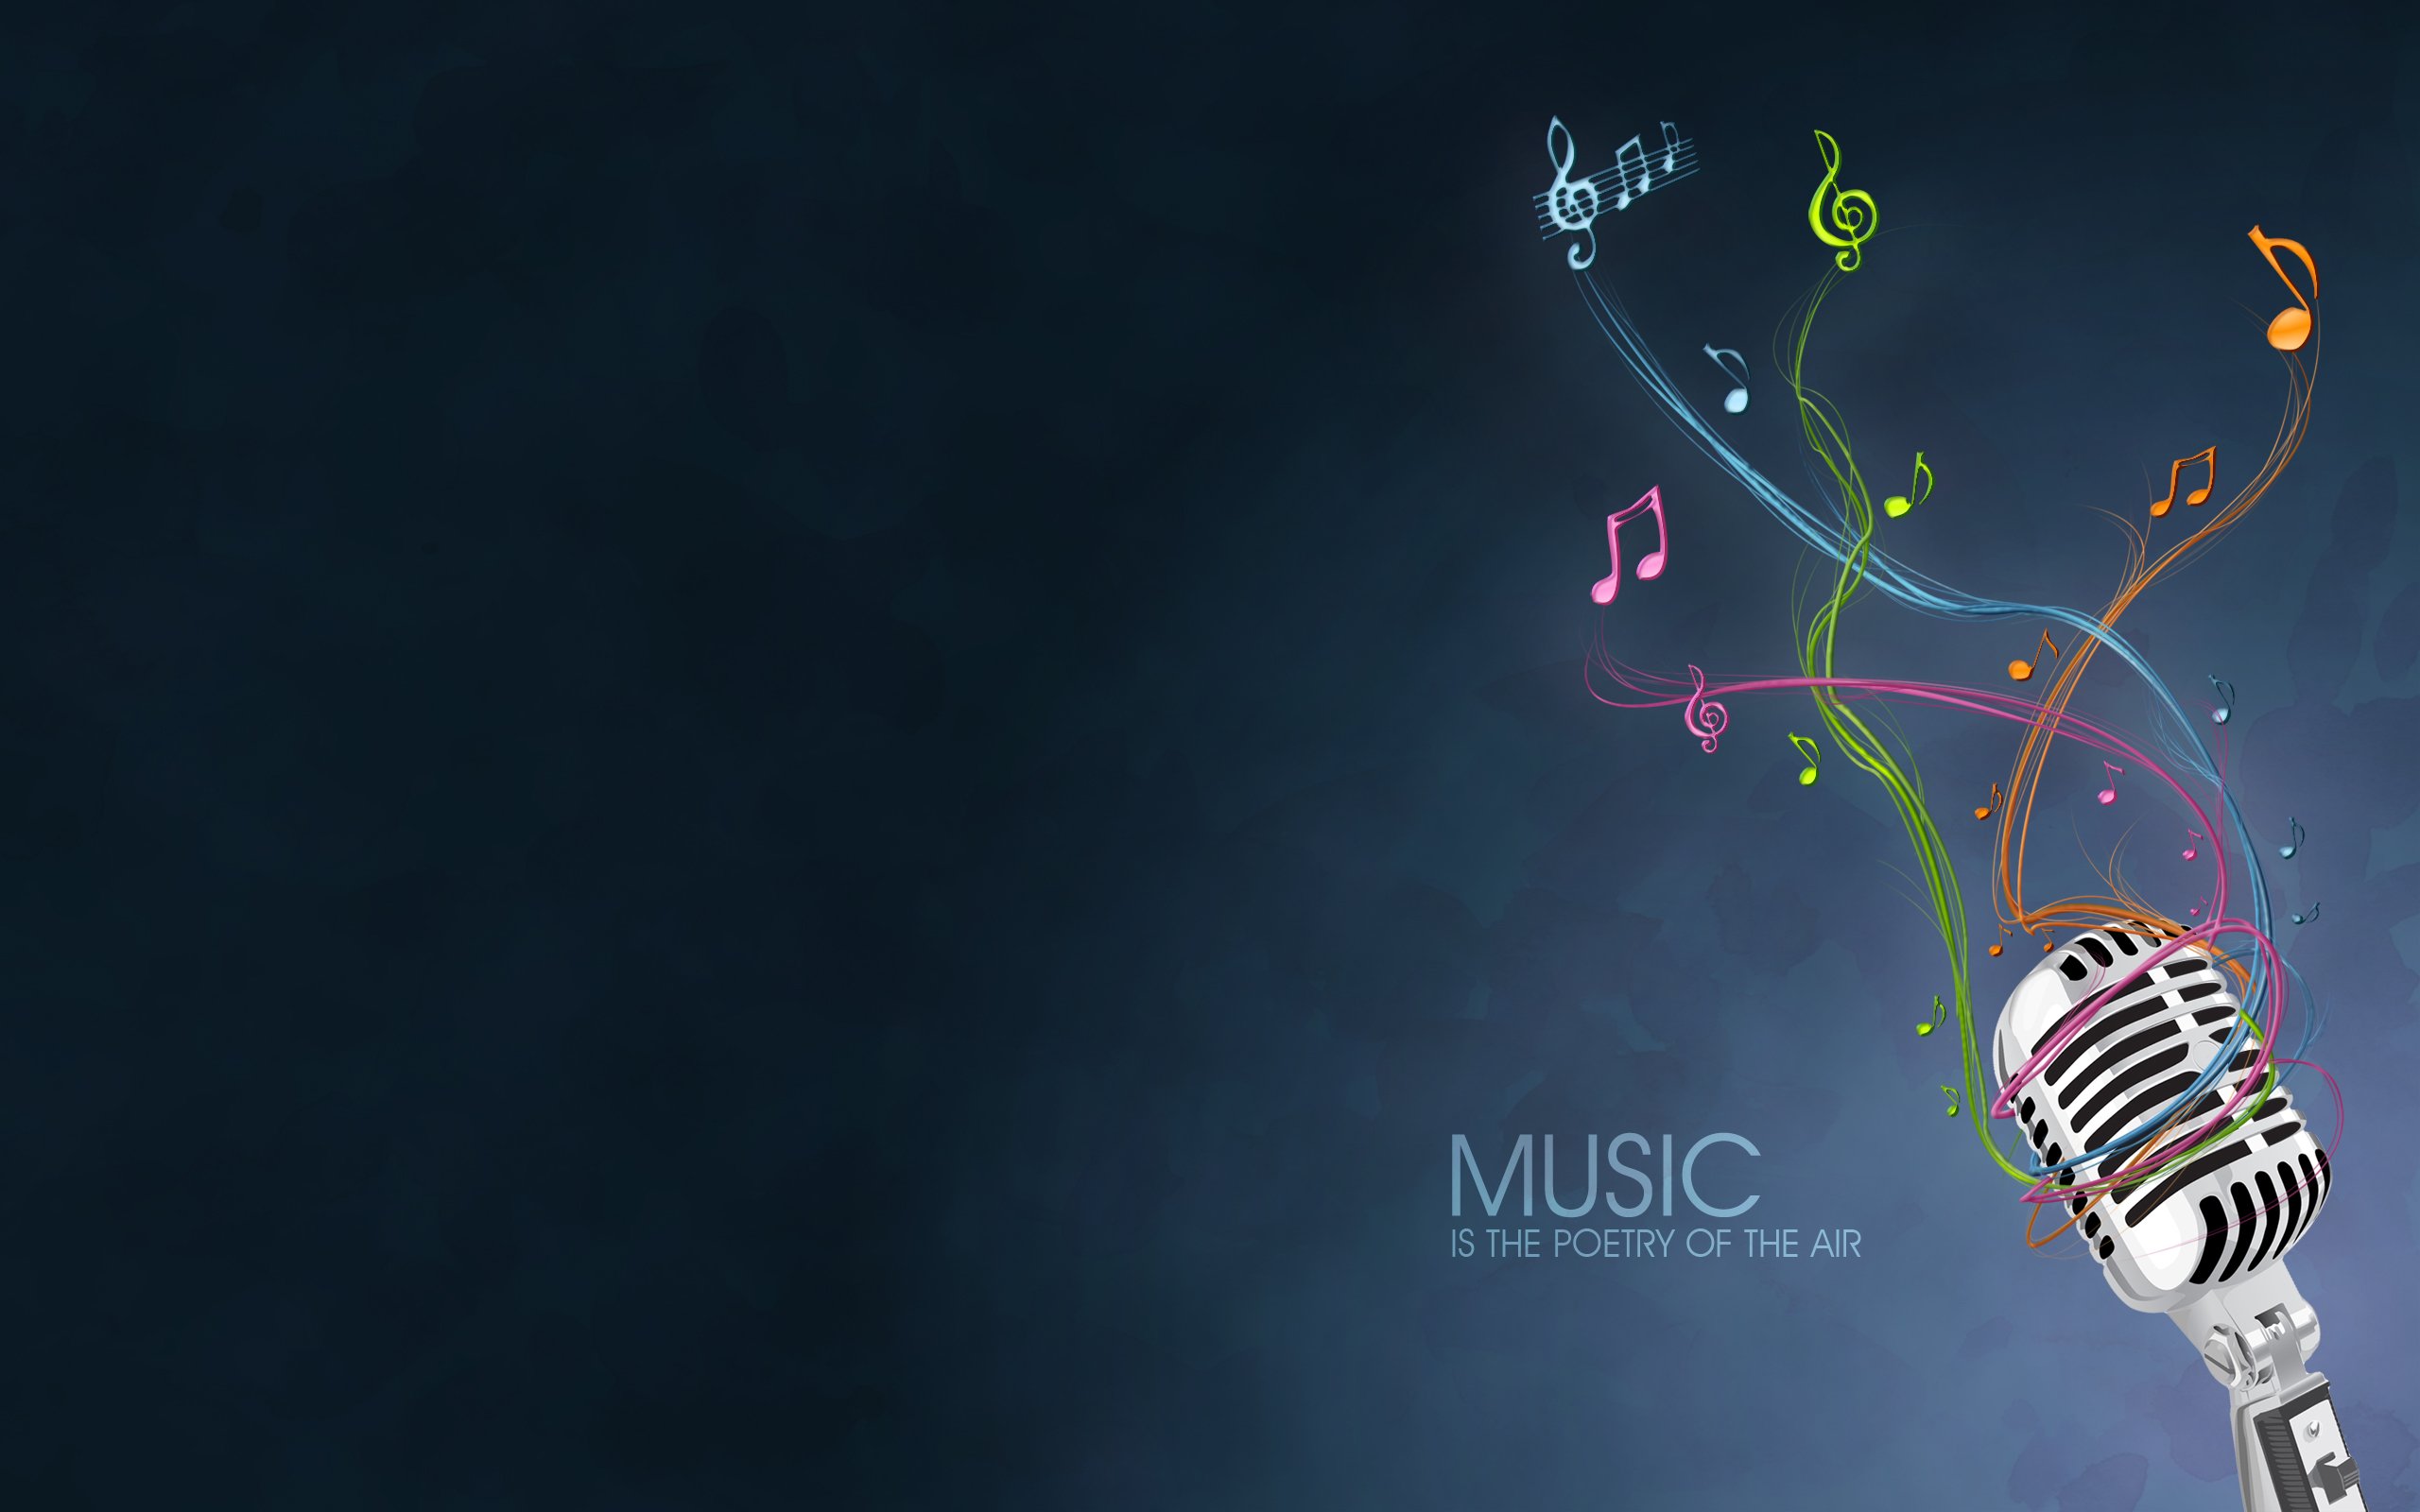 Music Notes Wallpaper 9815 Hd Wallpapers in Music   Imagescicom